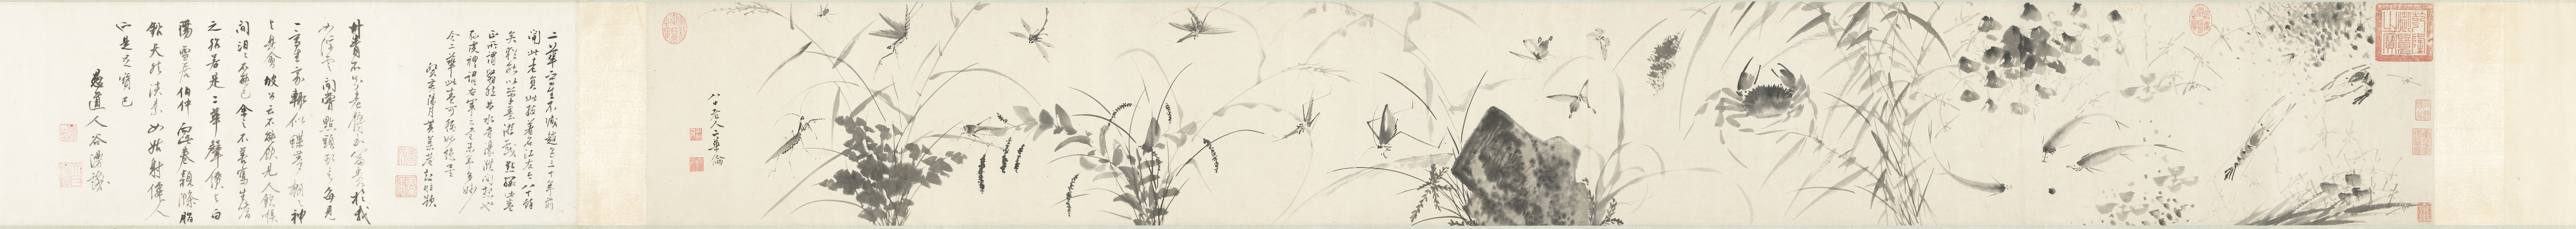 Ming Changlun Grass and Insect